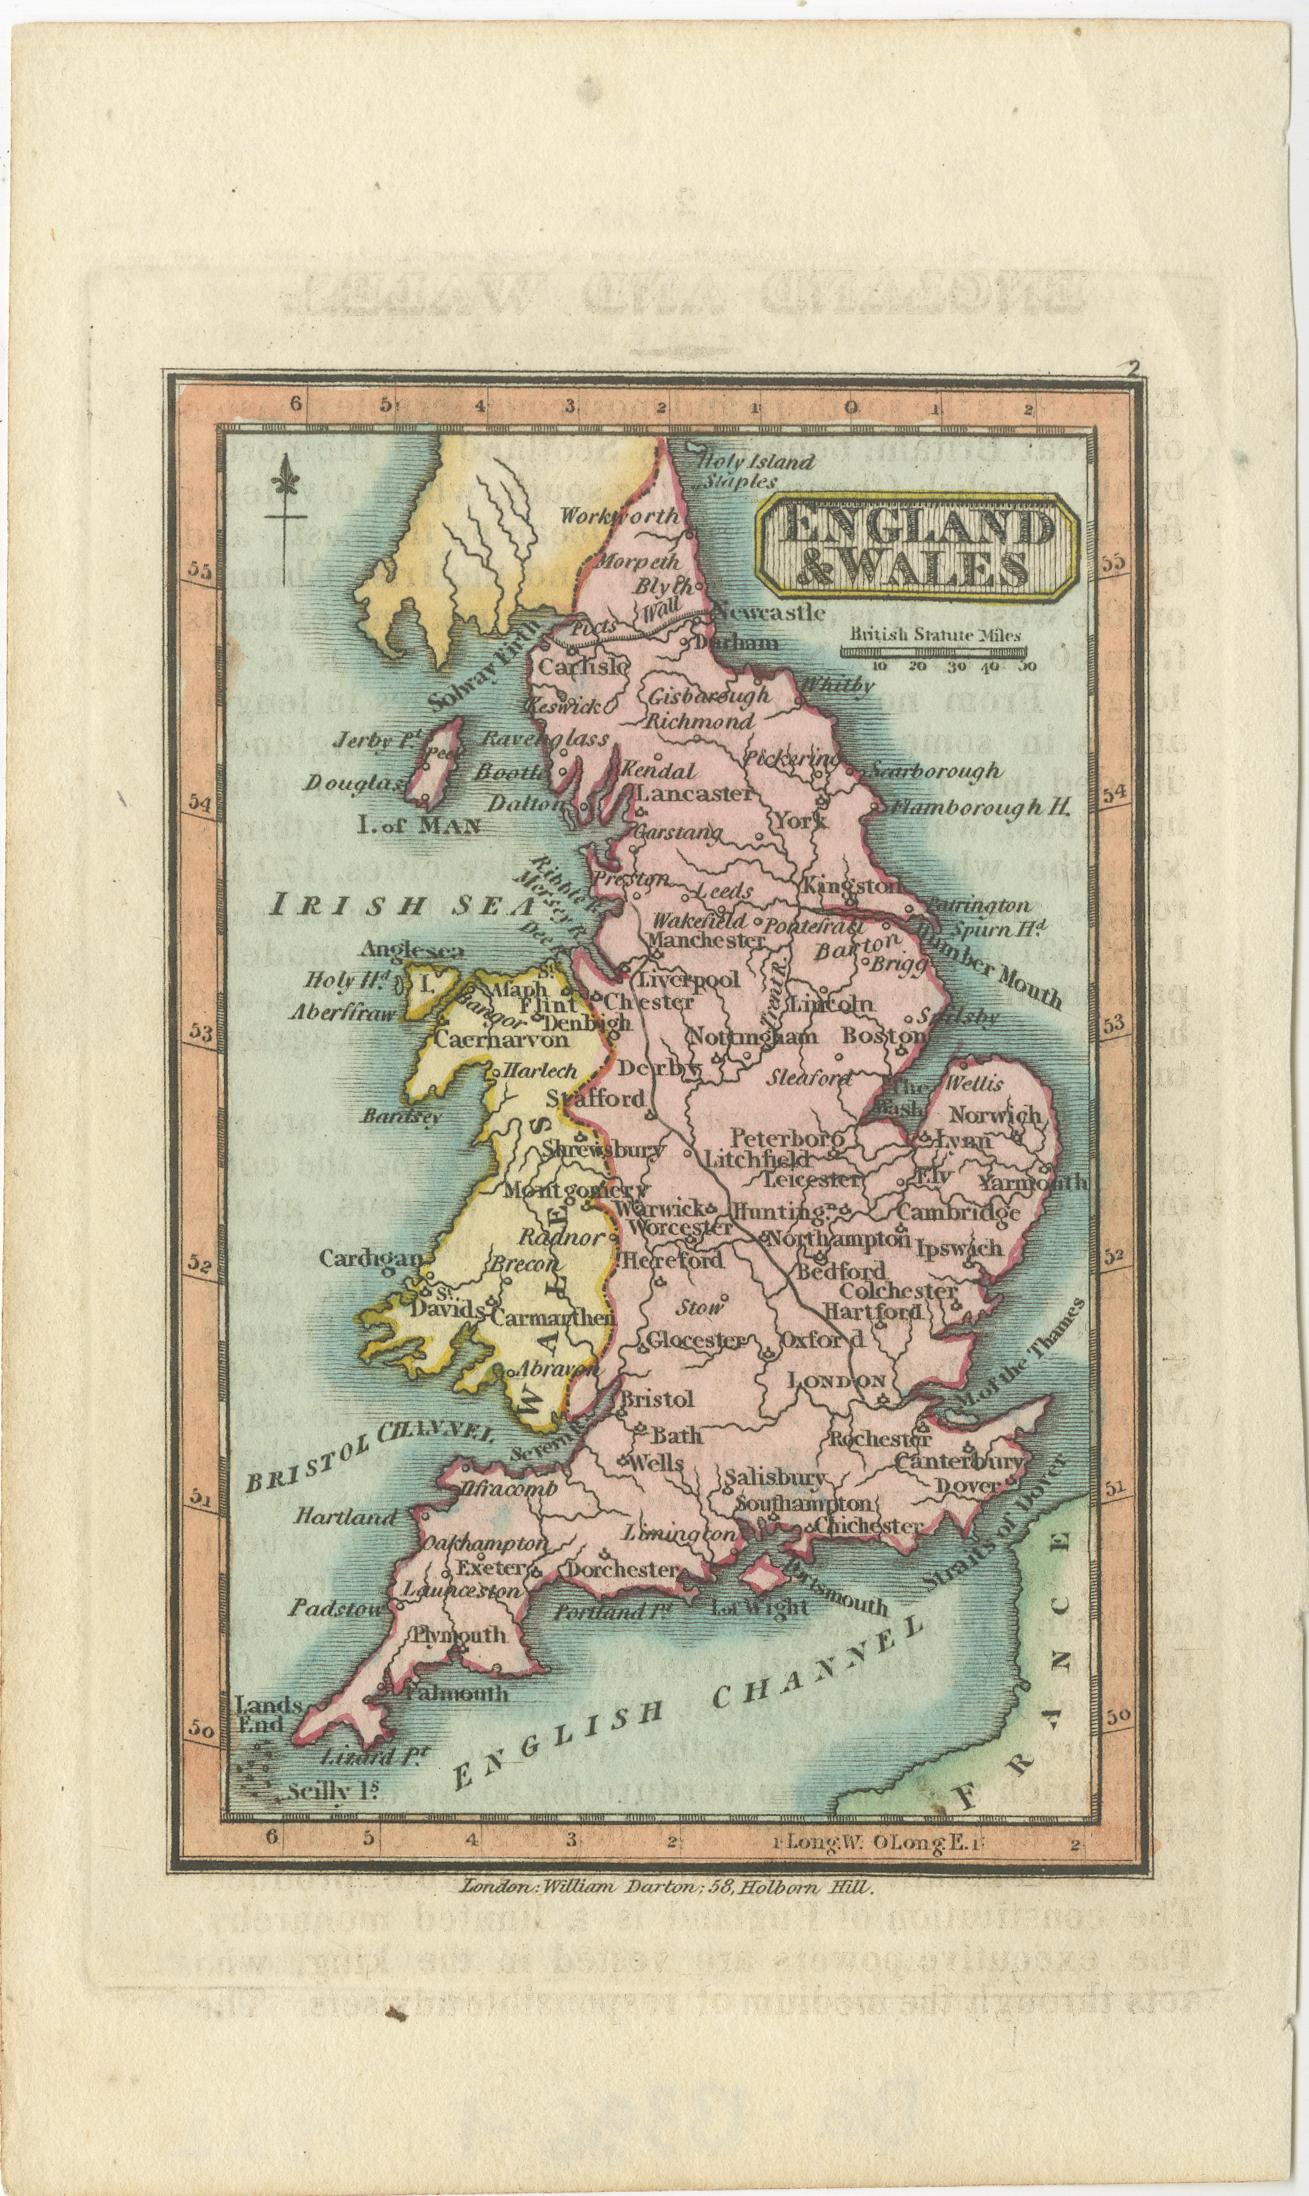 Miniature map titled 'England & Wales'. Original antique map of England & Wales. This map originates from 'Darton's New Miniature Atlas' published by William Darton, circa 1820. Maps from this atlas are colored impressions of the 1810 issue of